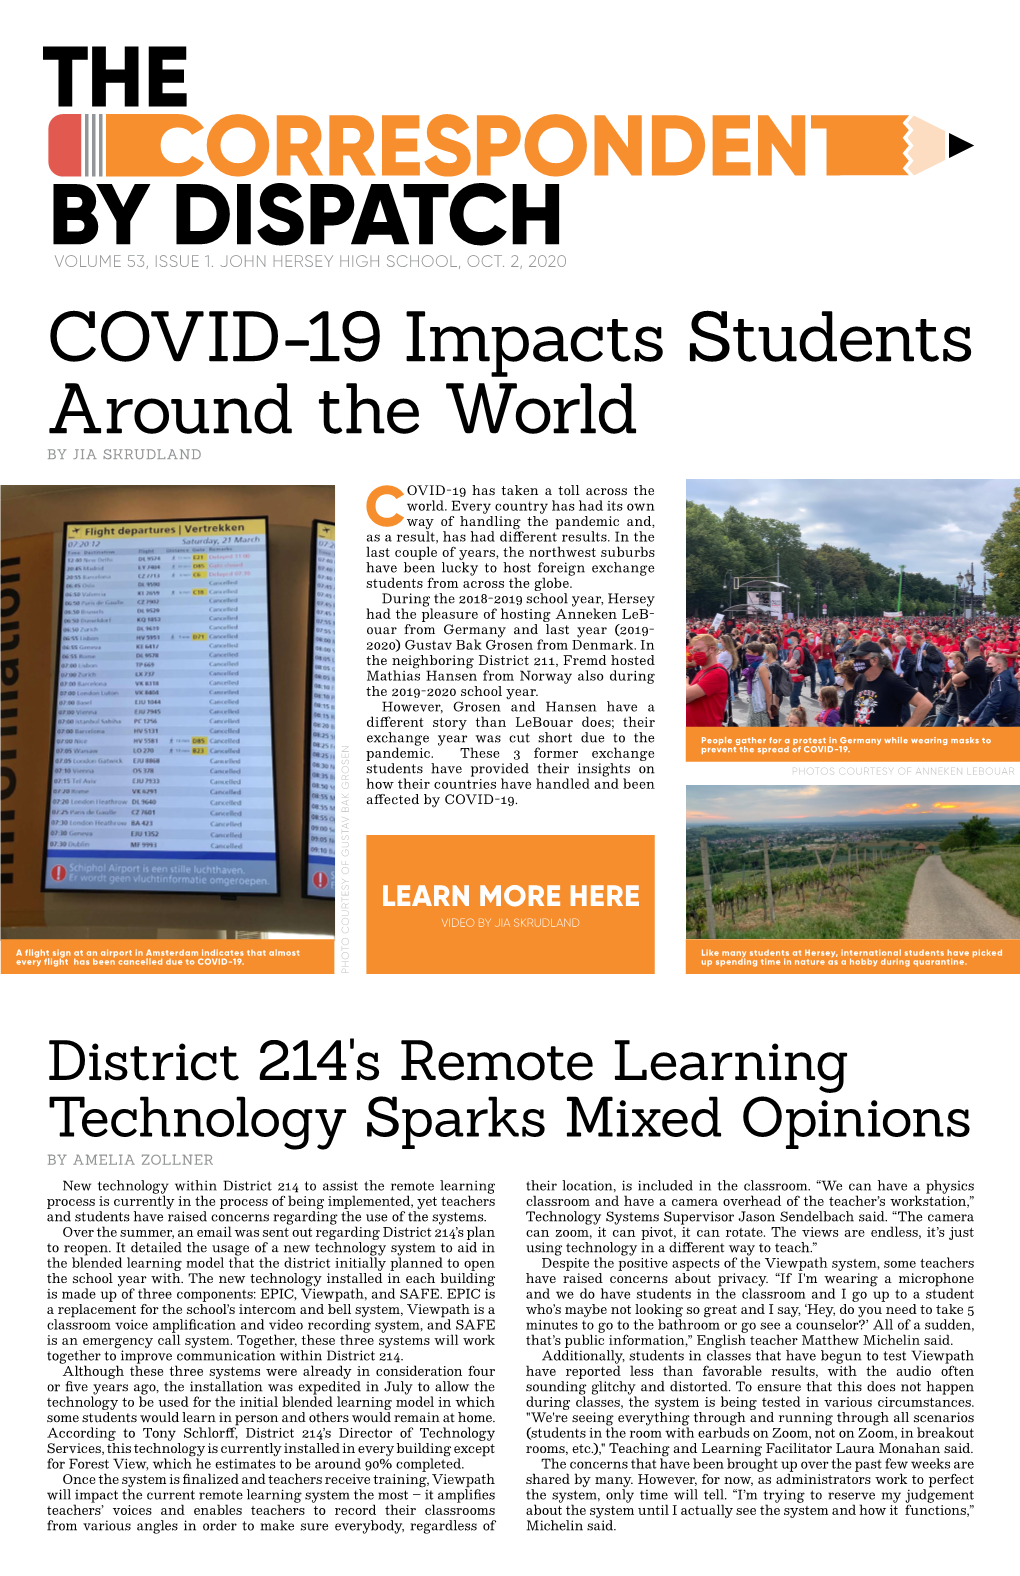 COVID-19 Impacts Students Around the World by JIA SKRUDLAND